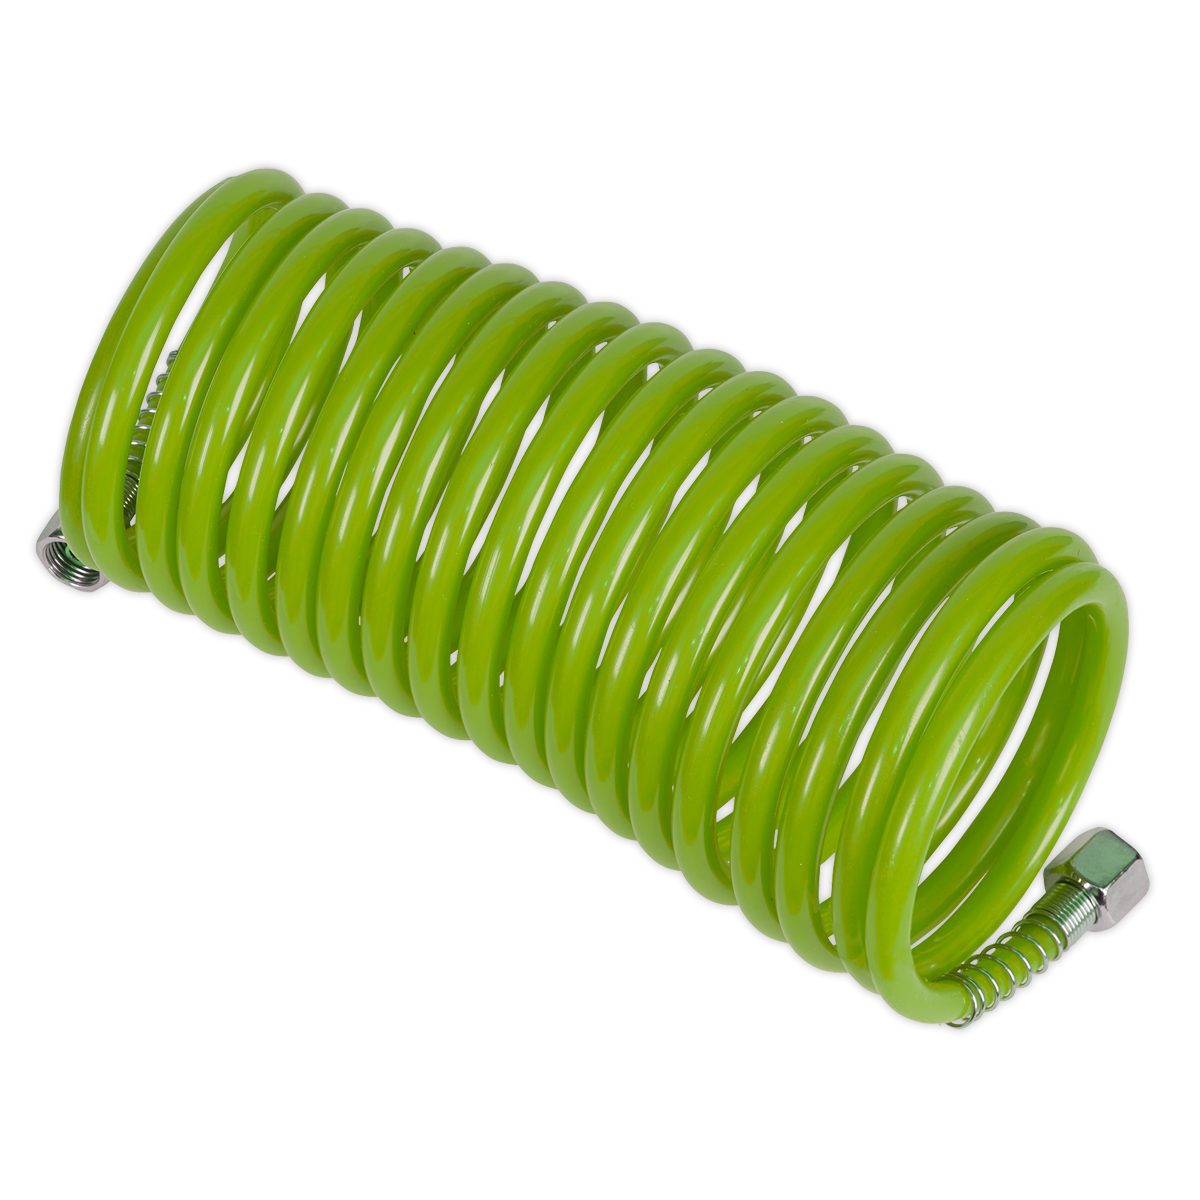 Sealey PE Coiled Air Hose 5m x Ø5mm with 1/4"BSP Unions - Green SA335G